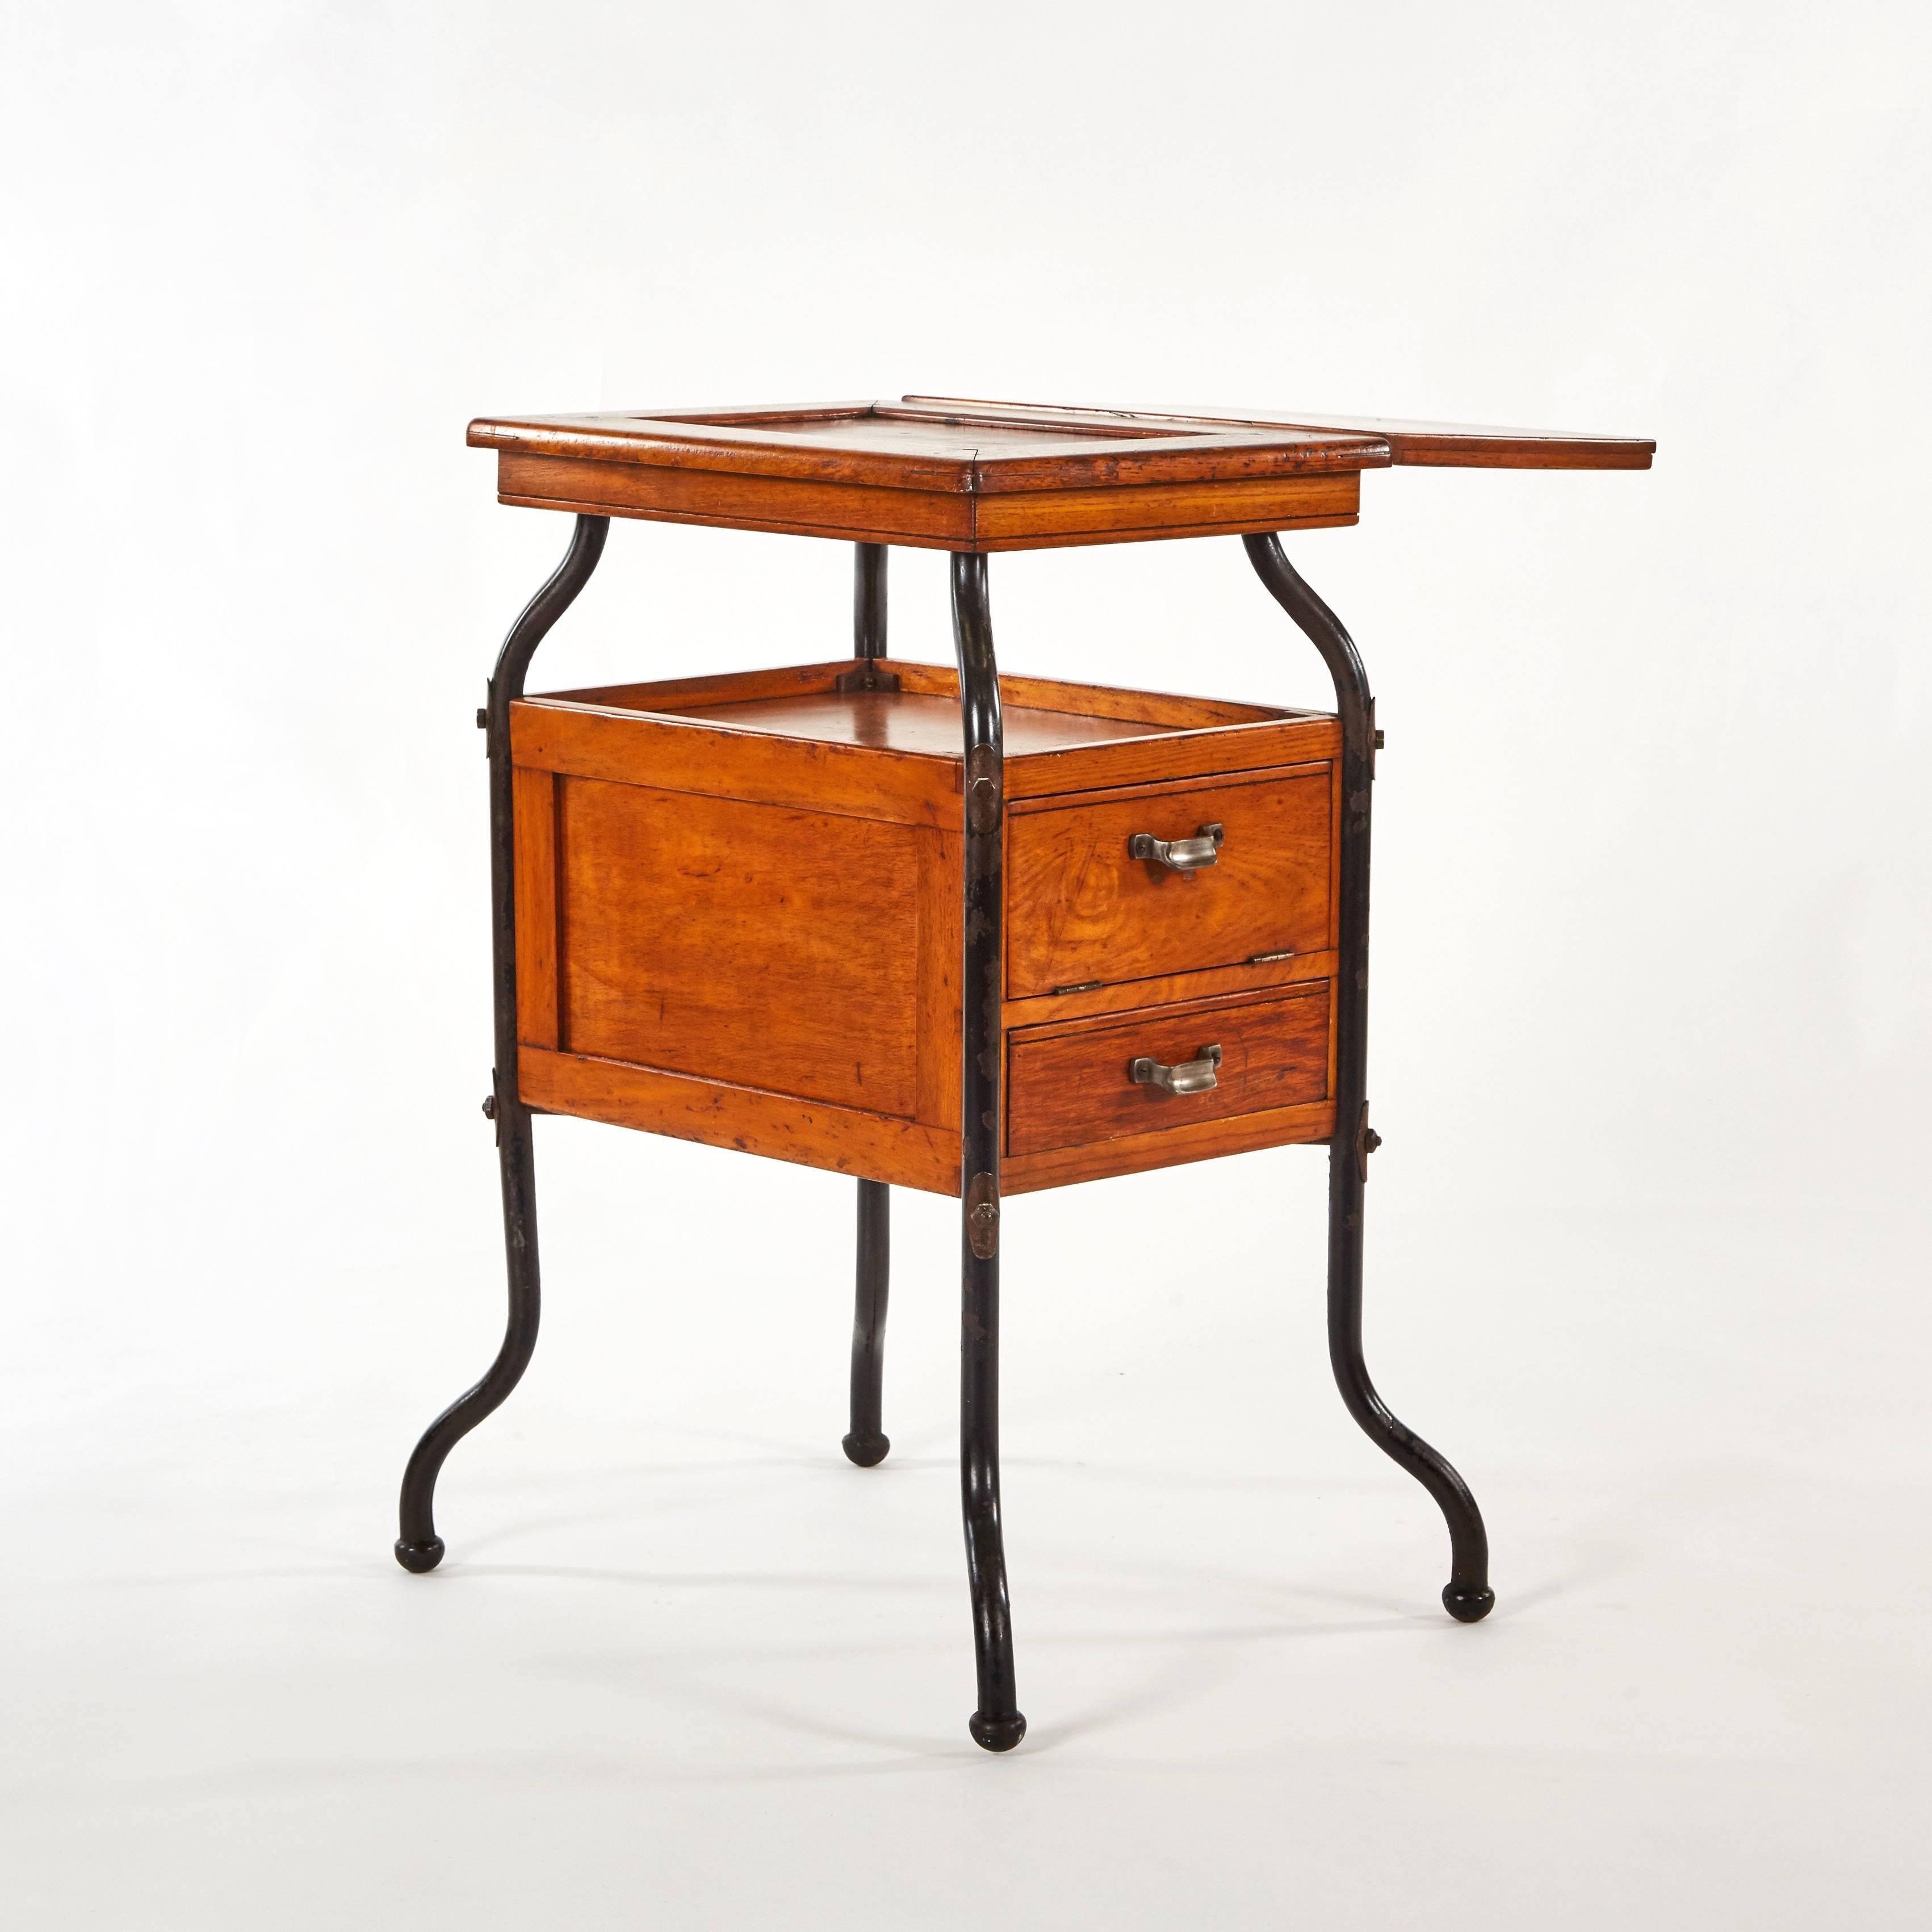 Early 20th-century English adjustable wood and steel side table with two multi-sectioned drawers with cupped handles. With its asymmetric shape and industrial finish, this uniquely multi-functional piece would work well as either a side table or